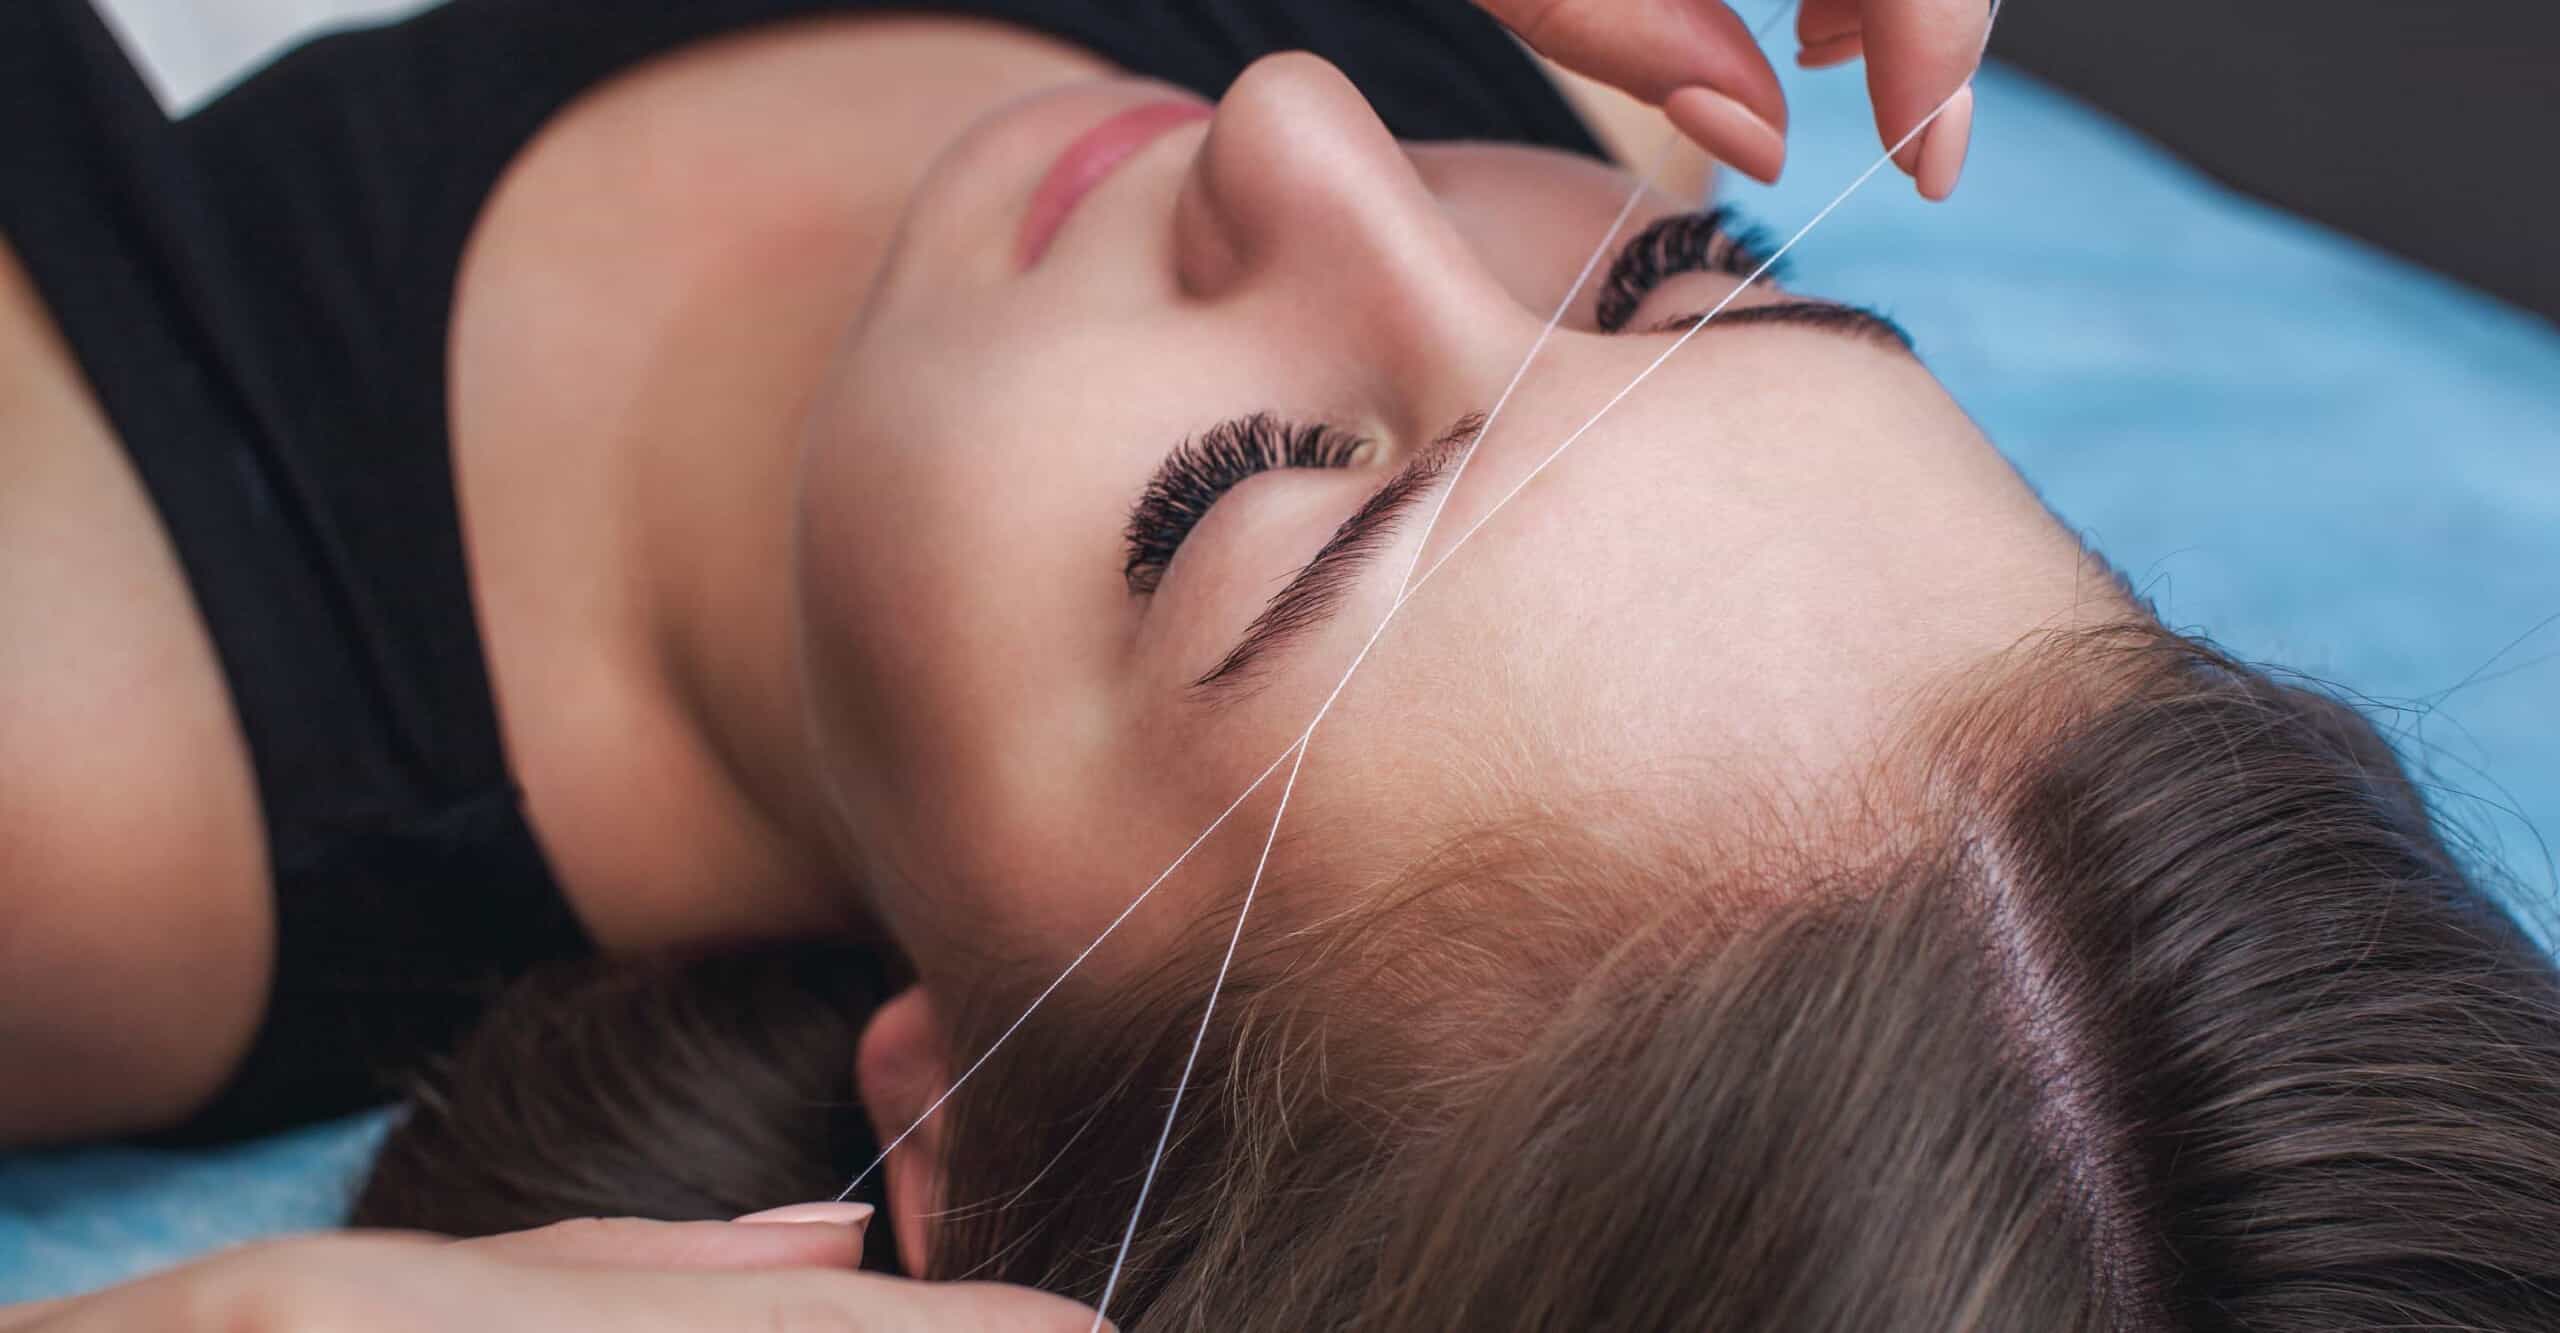 How Much Does Eyebrow Threading Cost? - StyleSeat